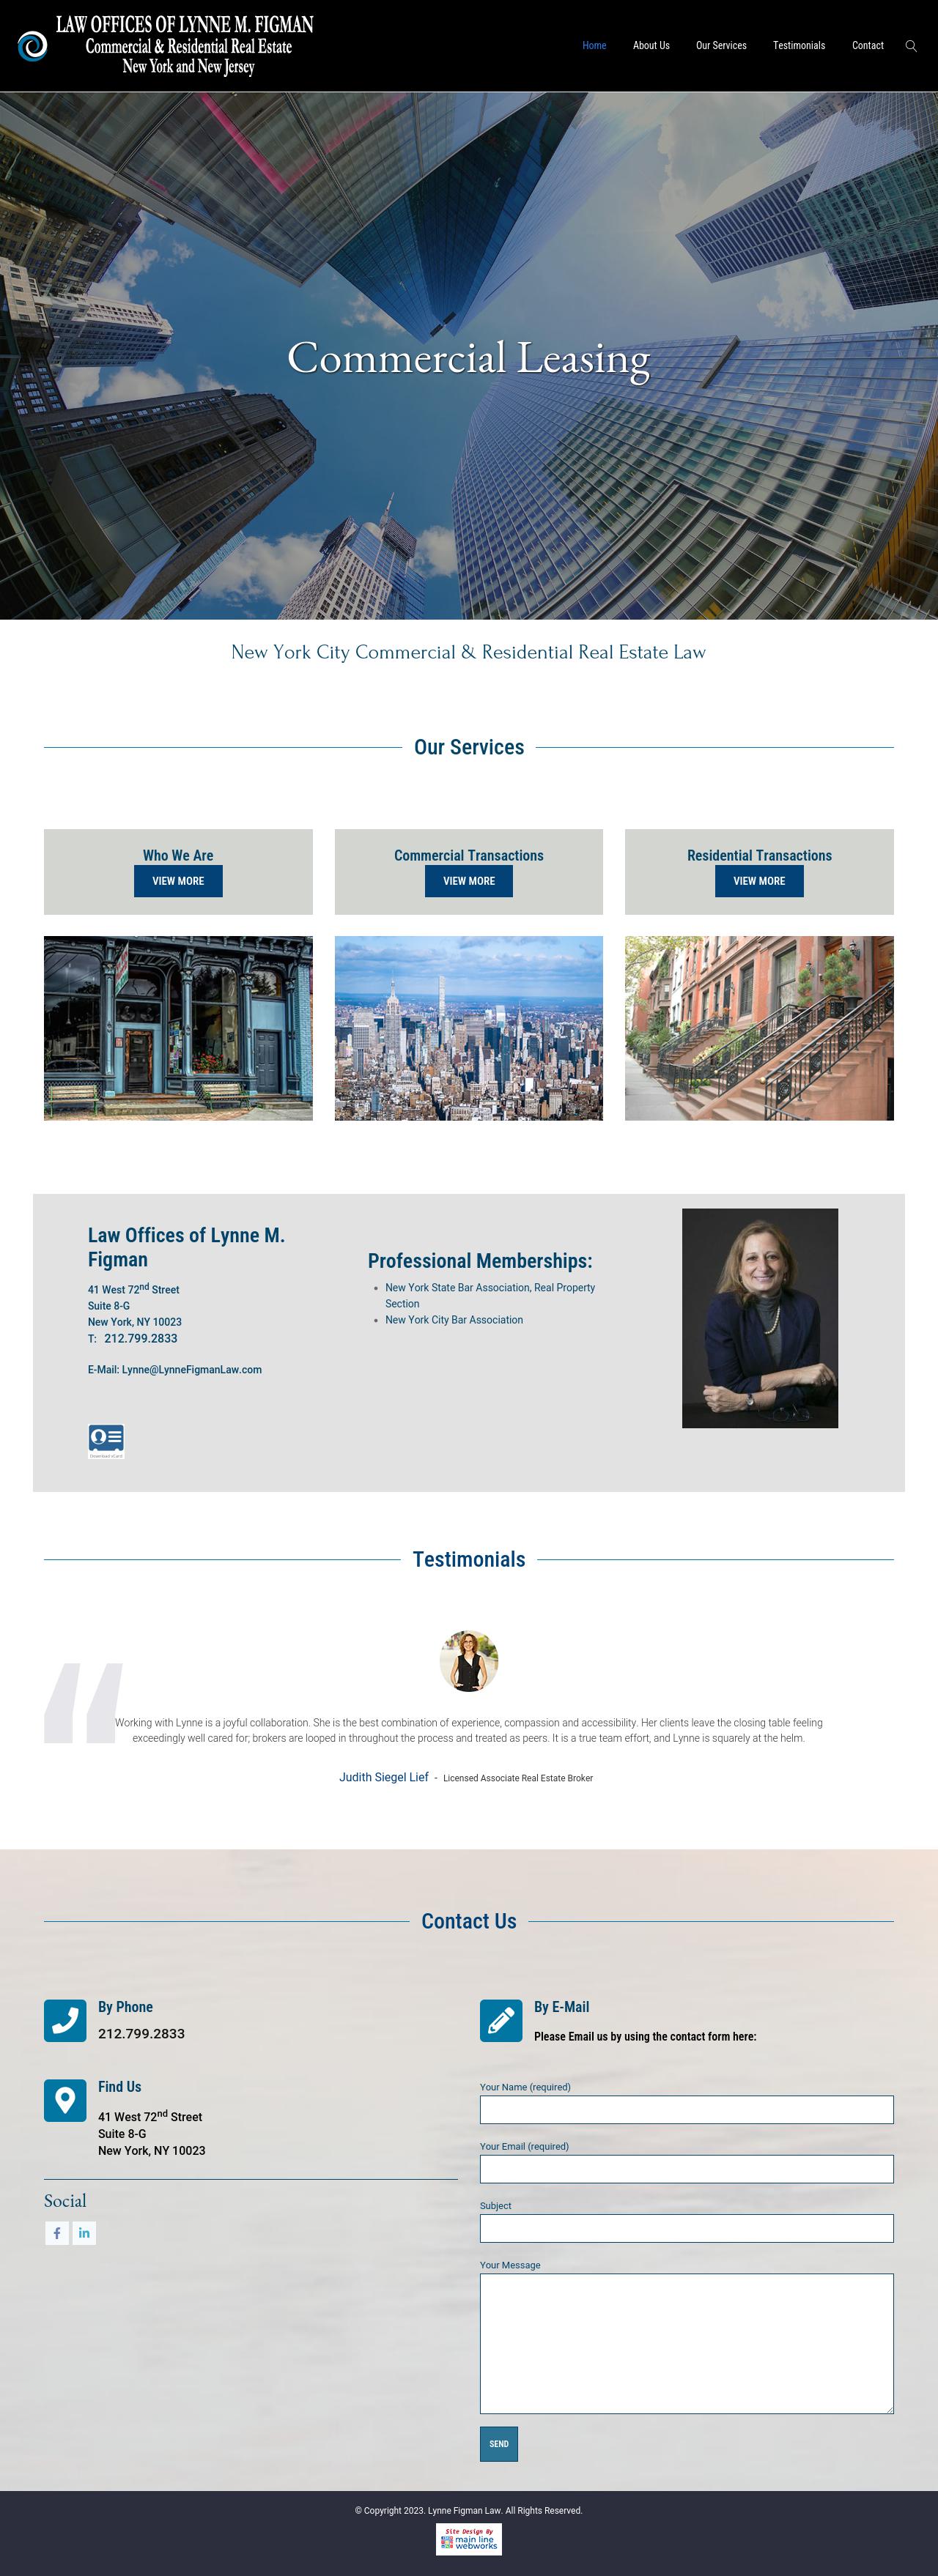 Law Offices of Lynne M. Figman - New York NY Lawyers